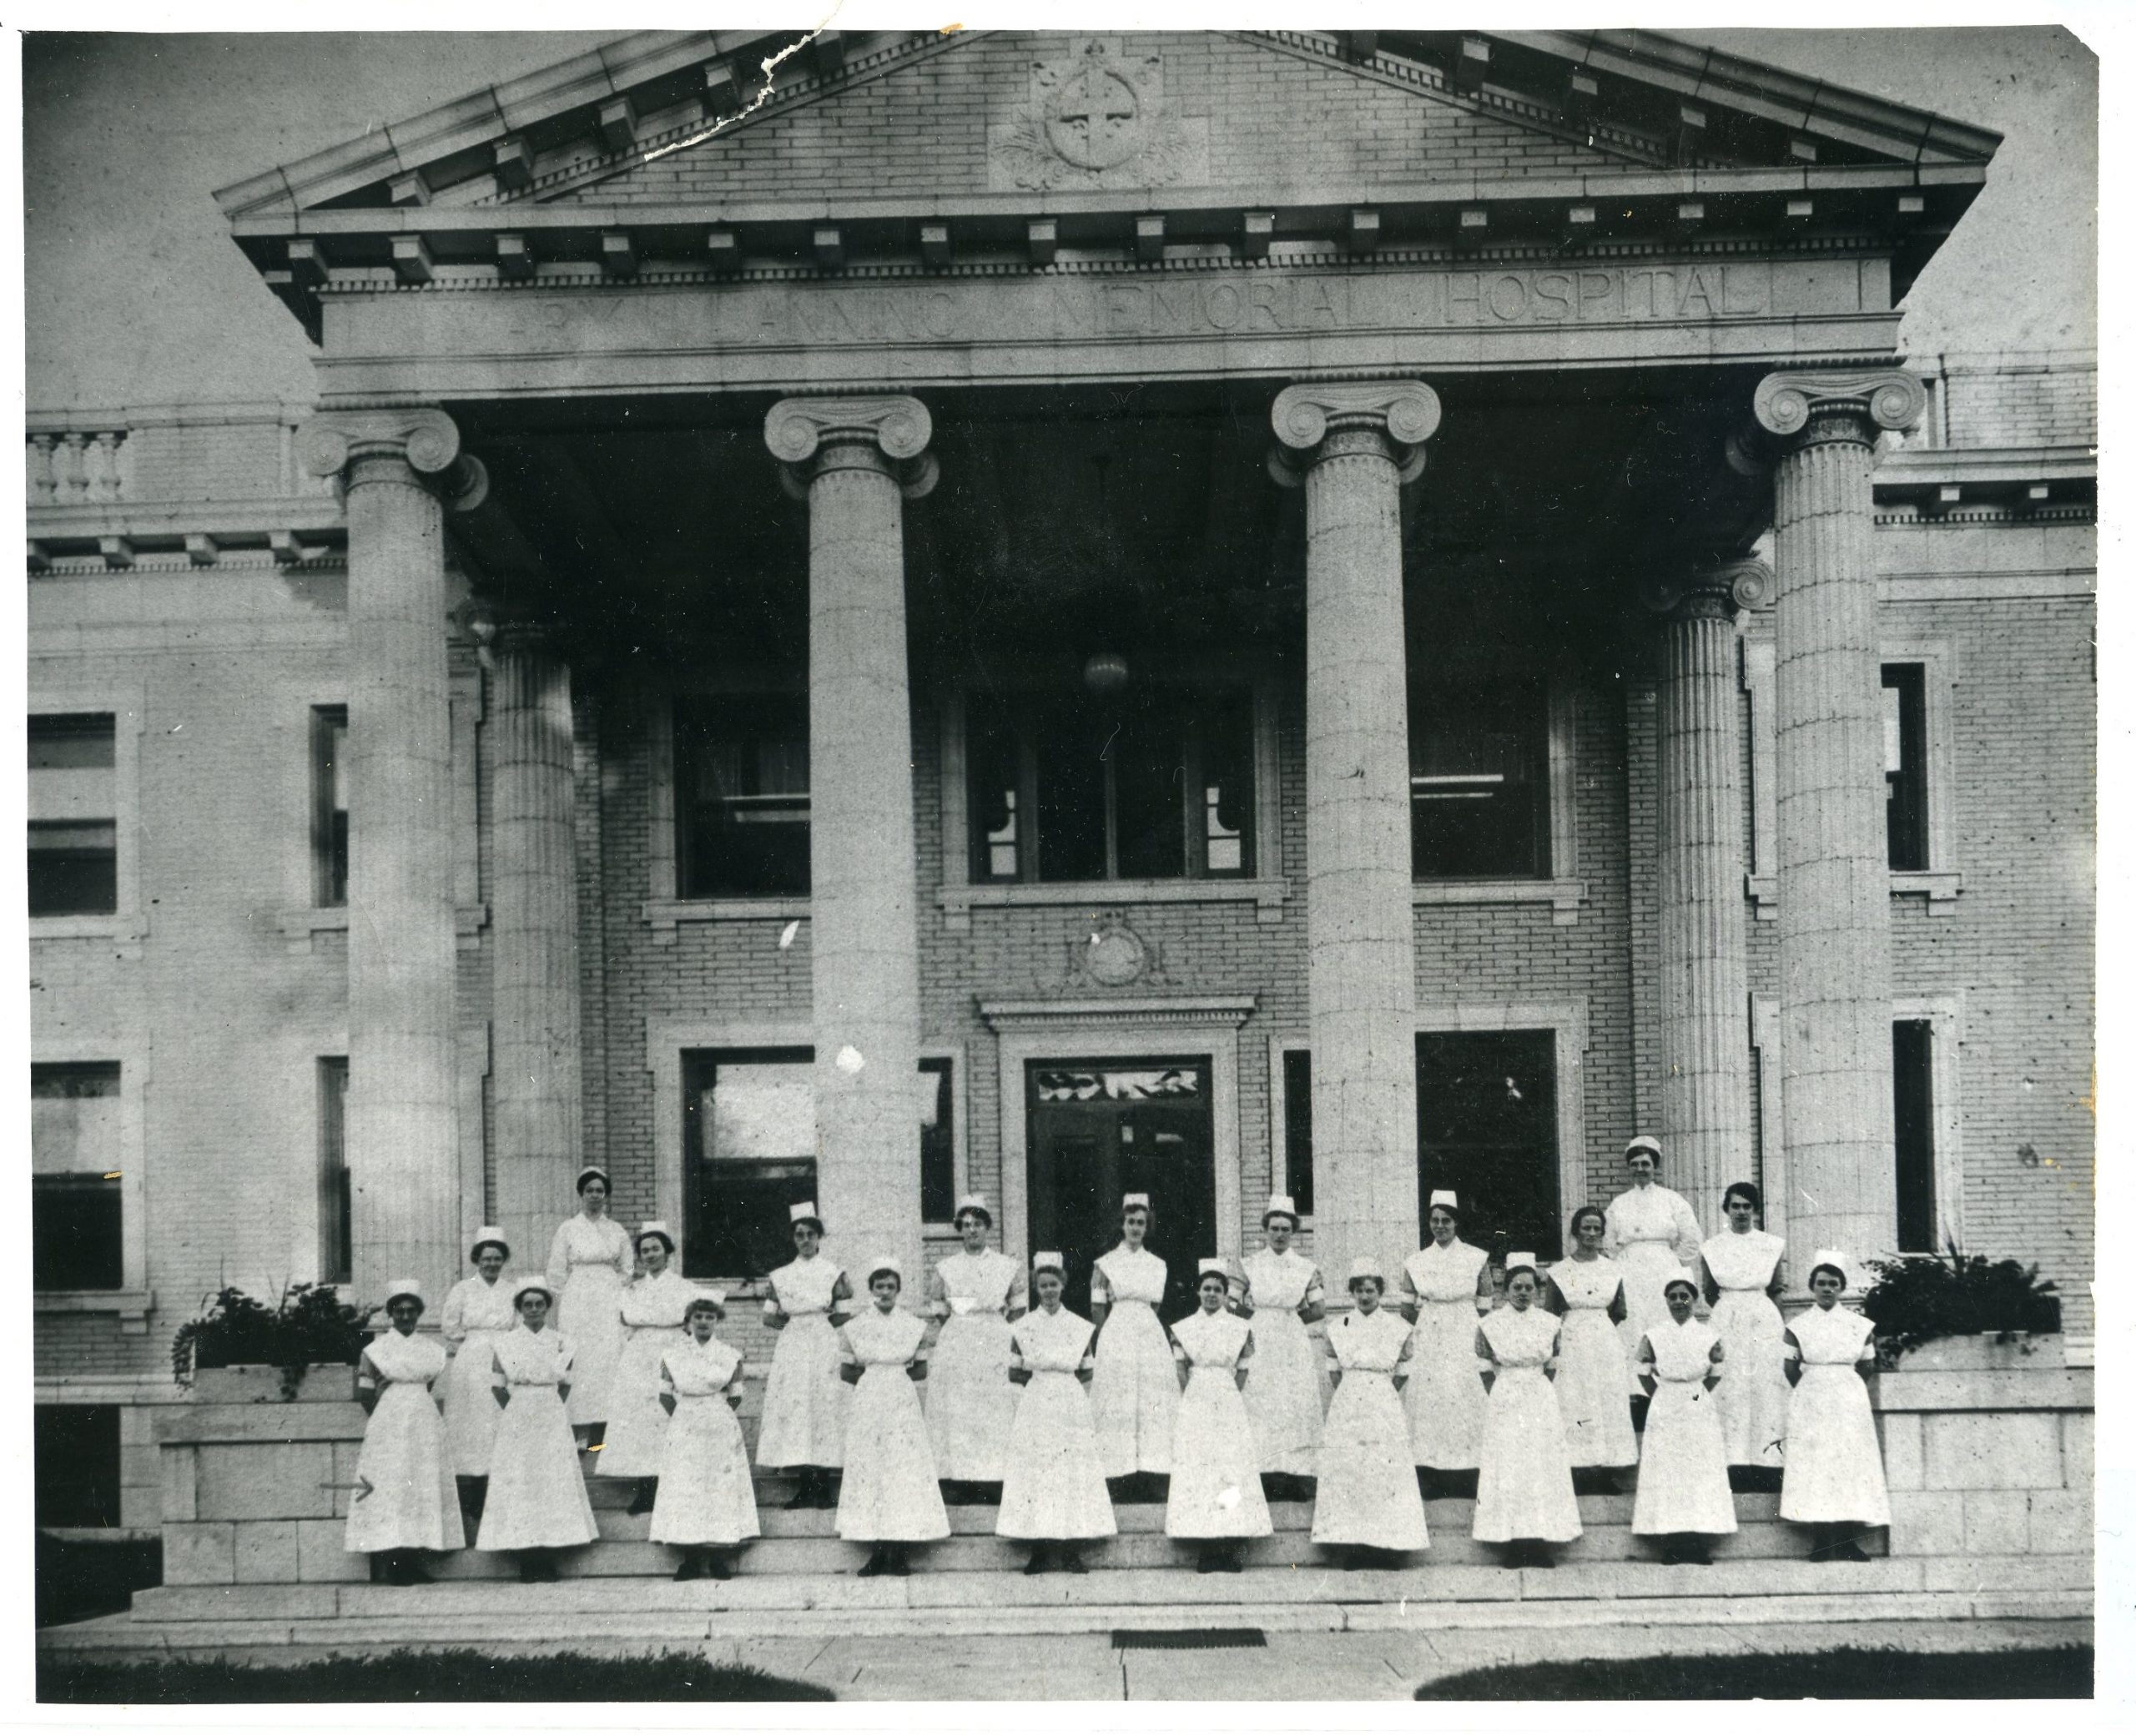 Nurses in front of Mary Lanning Hospital. Courtesy of Adams County Historical Society.